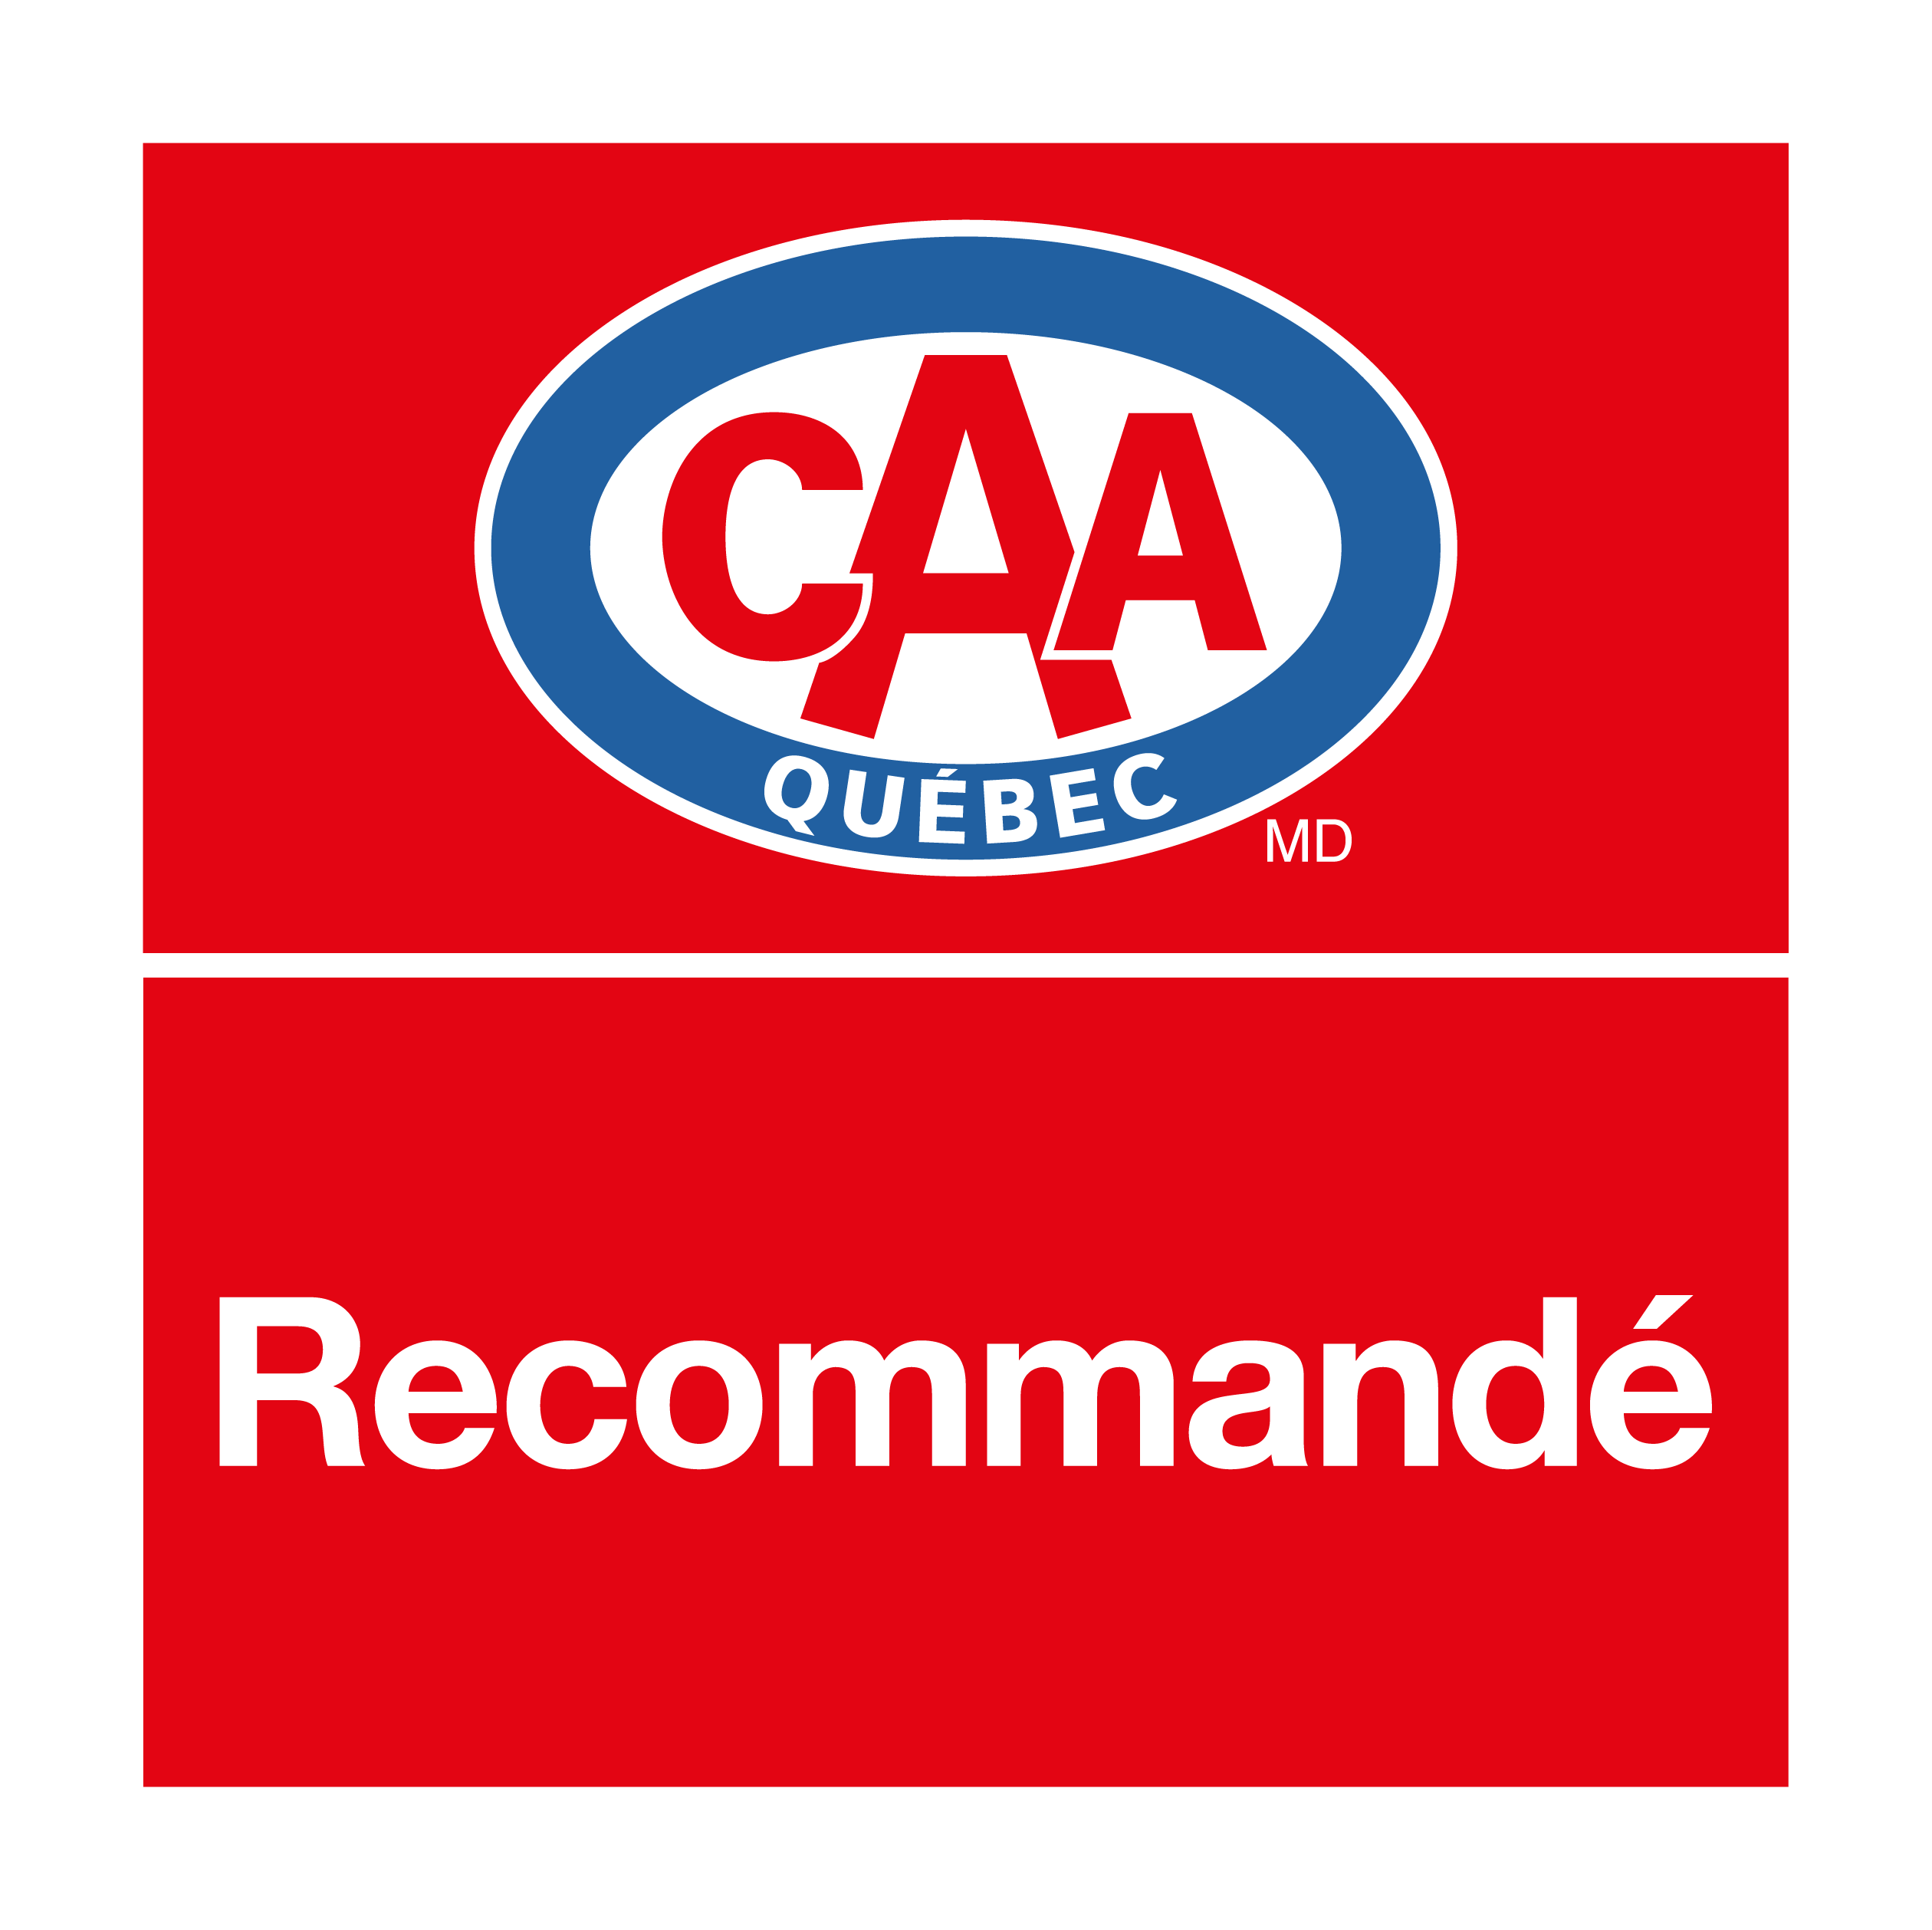 CAA Quebec recommended